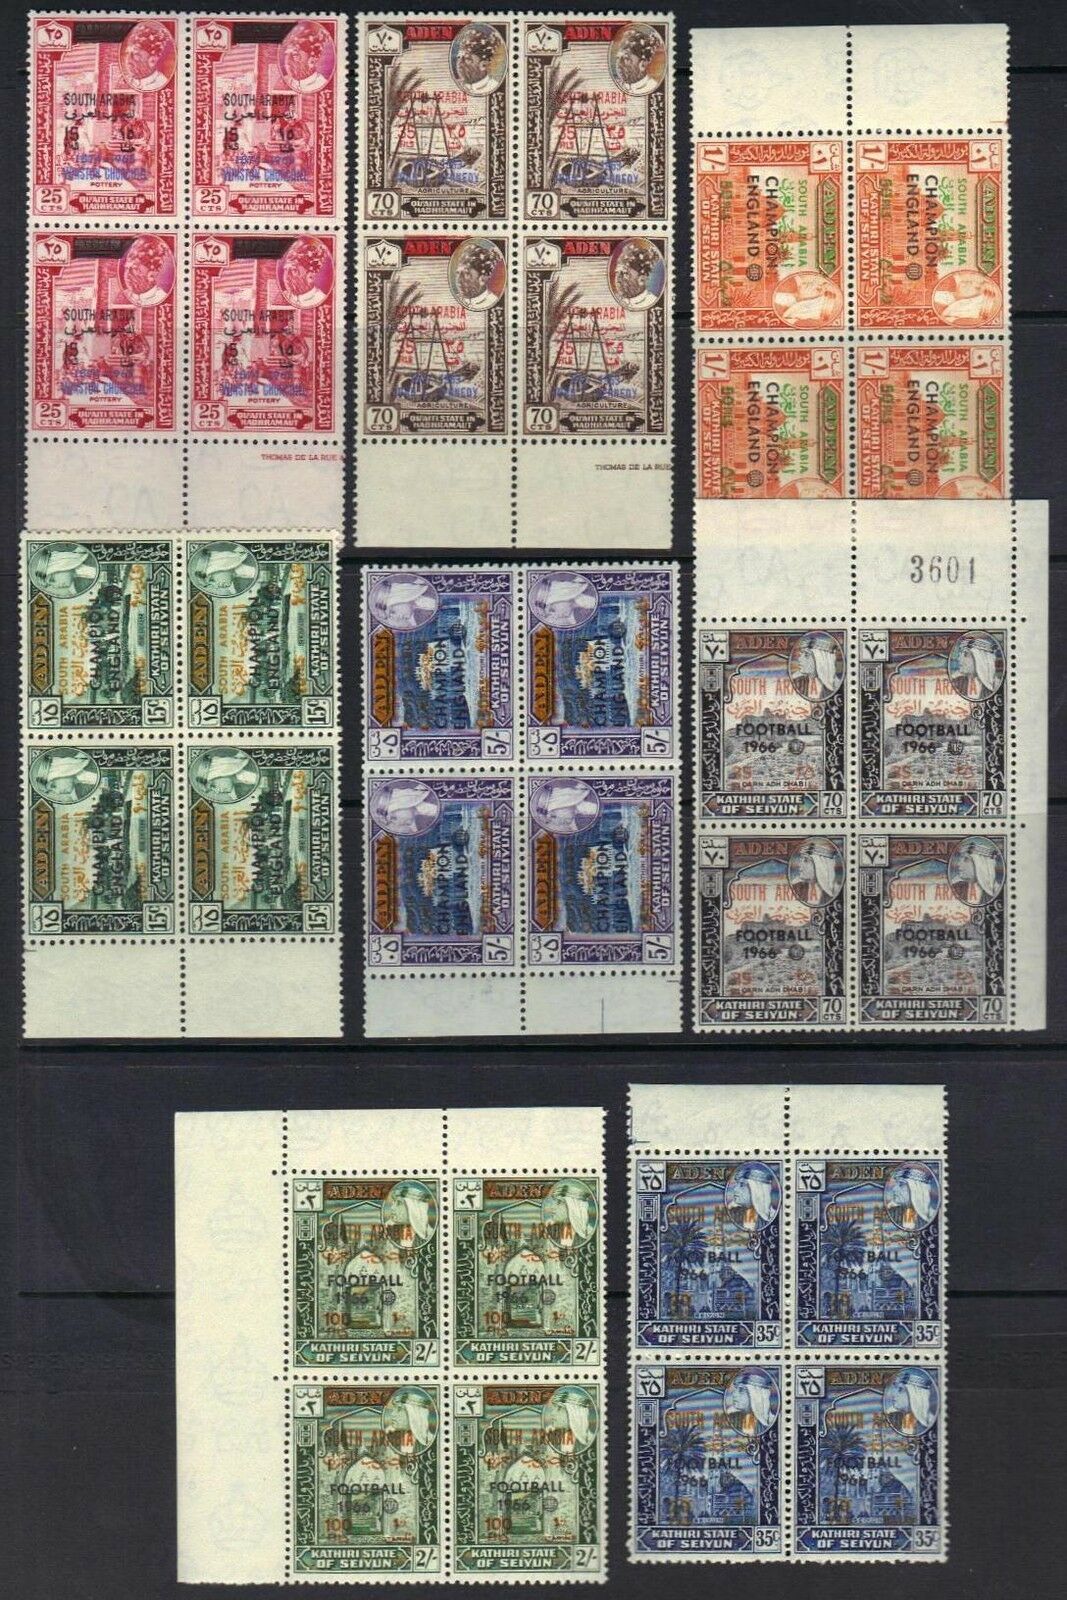 ADEN SOUTH ARABIA 1966 Sc 55 62 64 67 IN BLOCKS OF 4 NEVER HINGED SUPERB